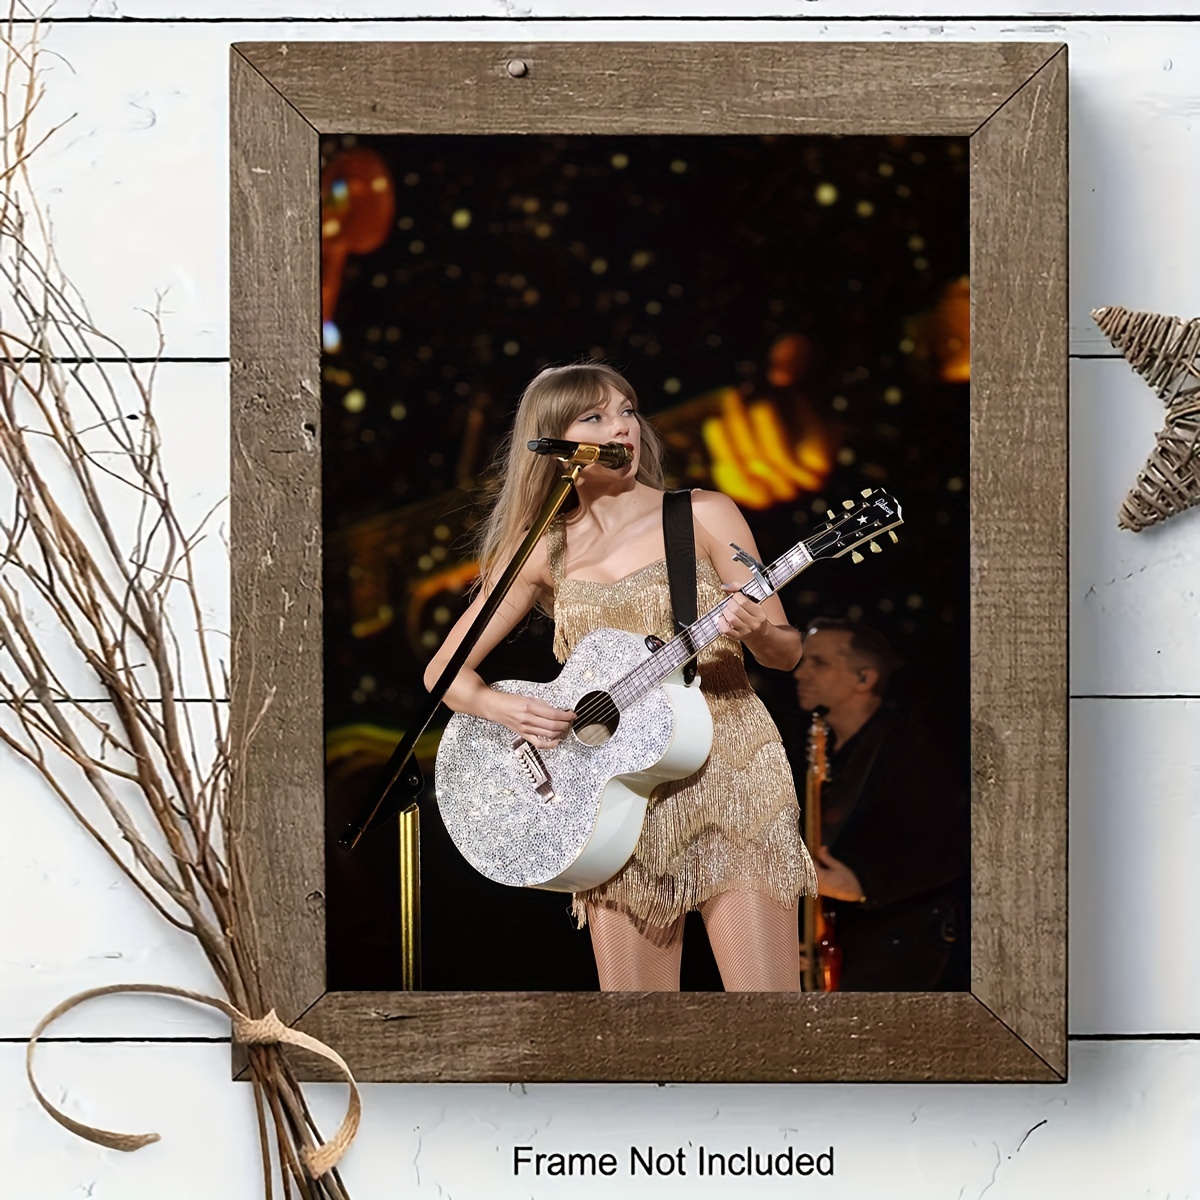 Wall Poster - Taylor Swift - Music Poster - Large Size Poster - HD